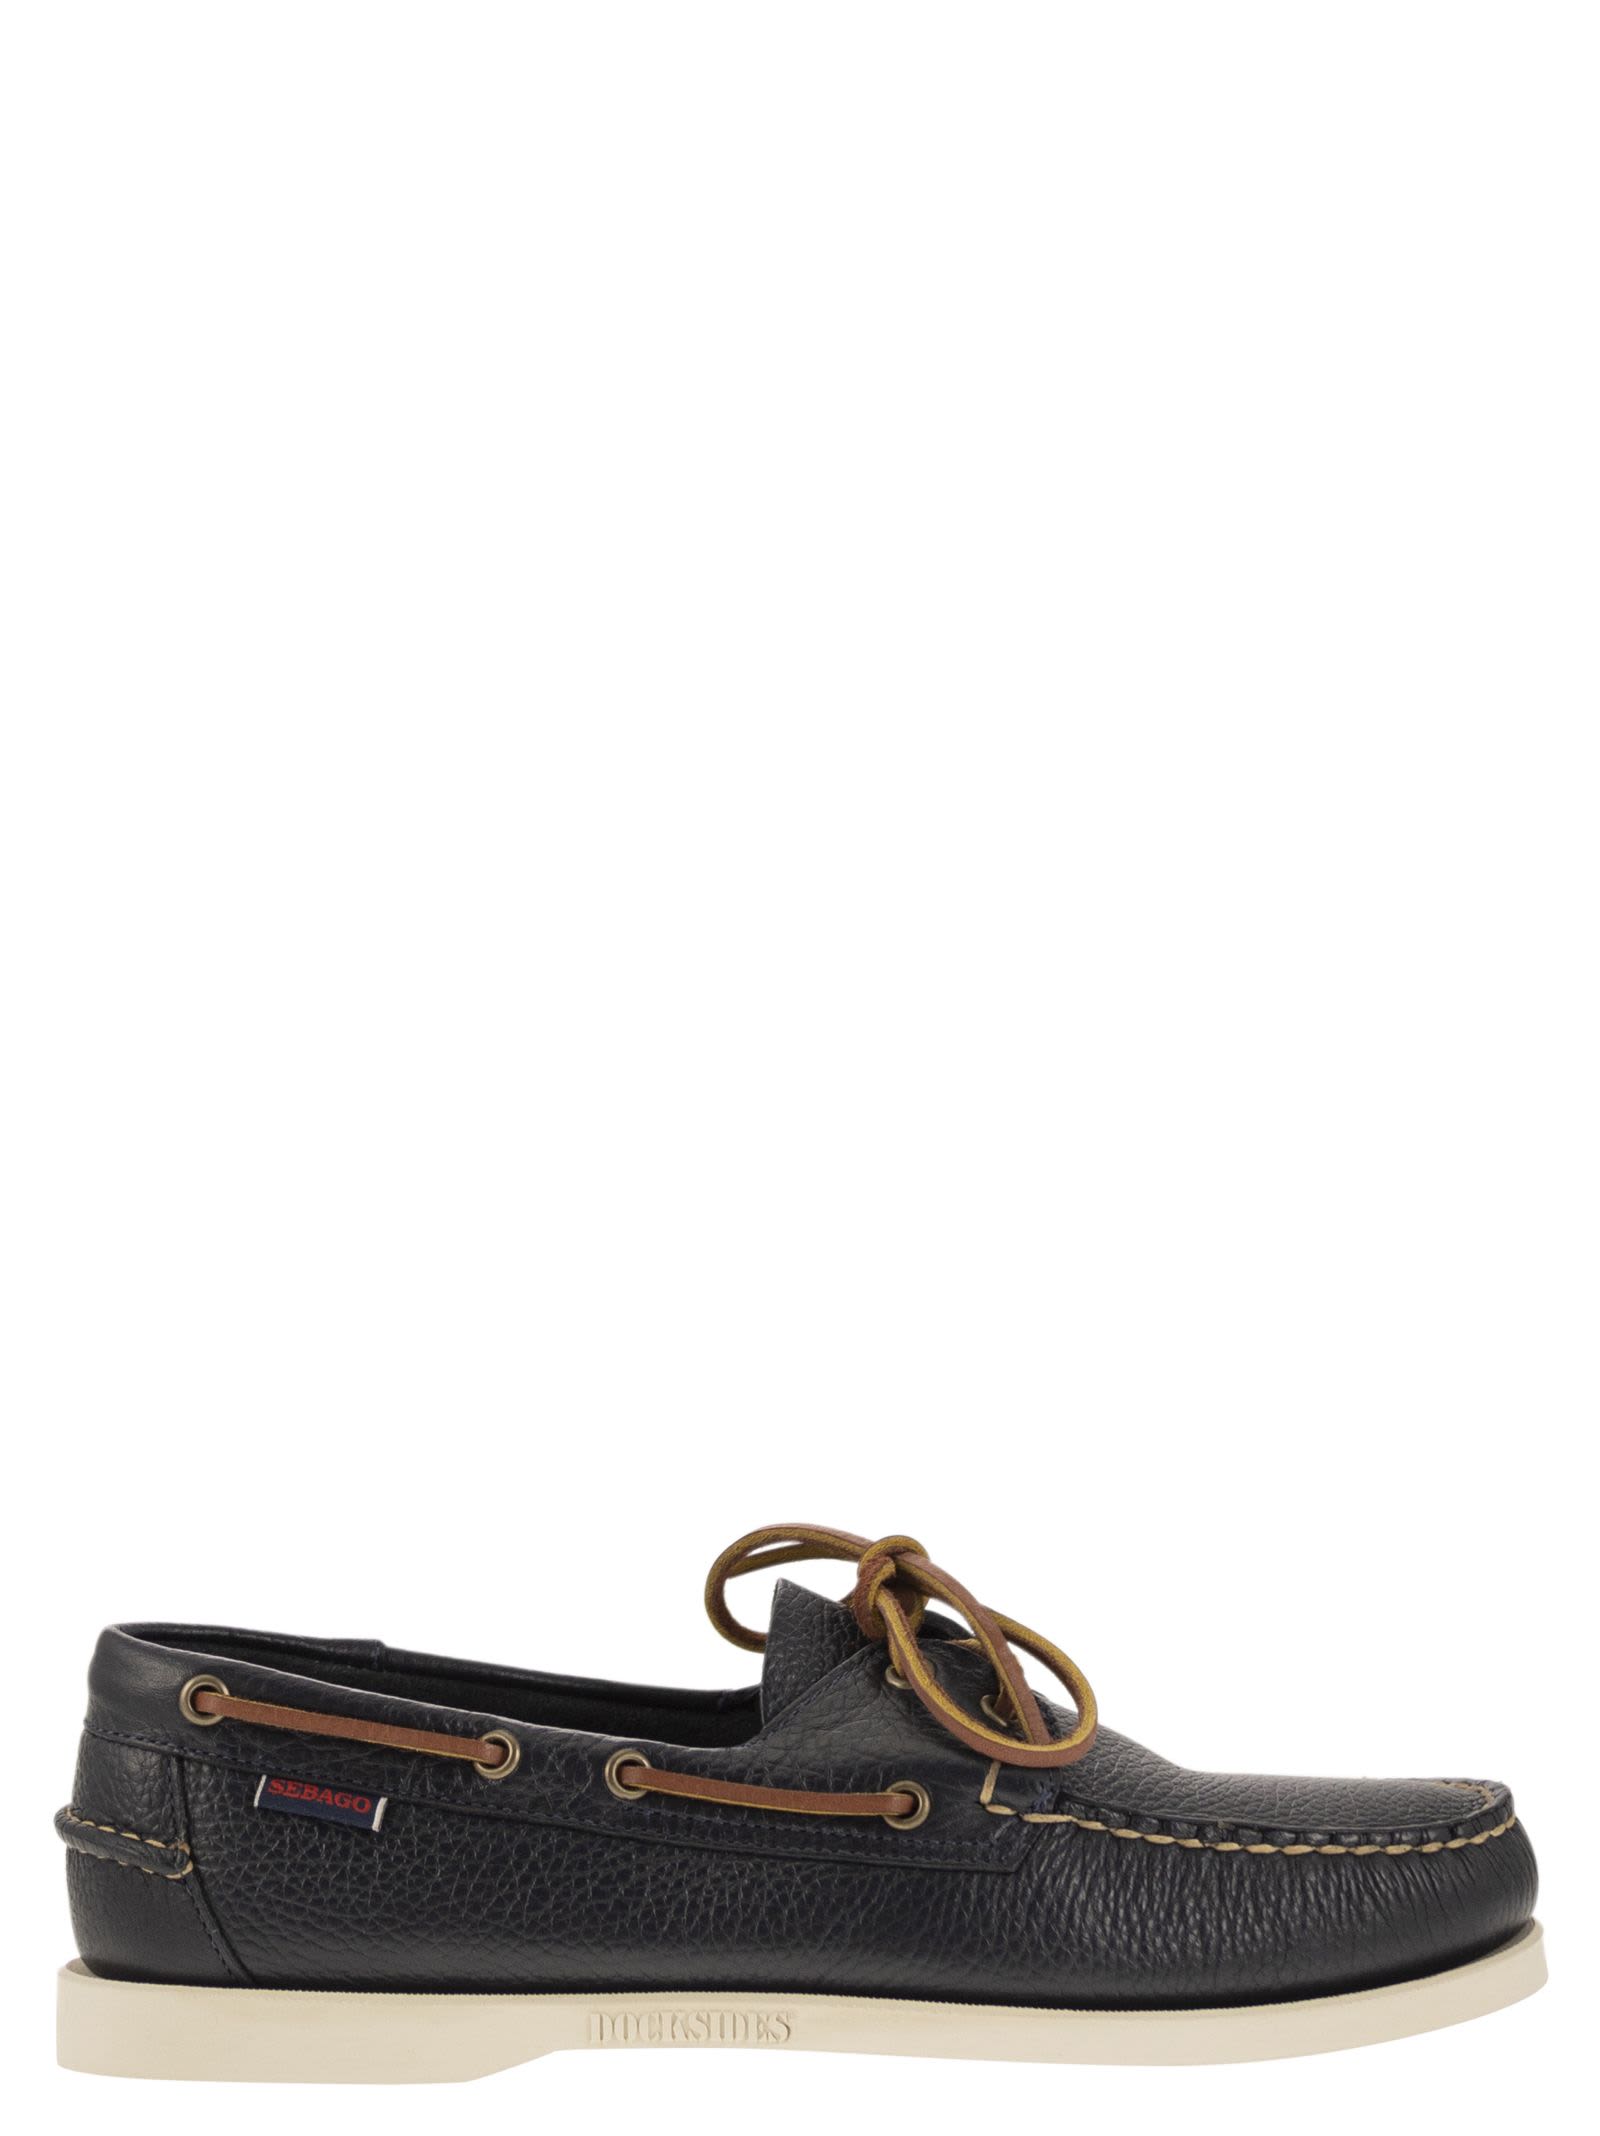 Portland - Moccasin With Grained Leather